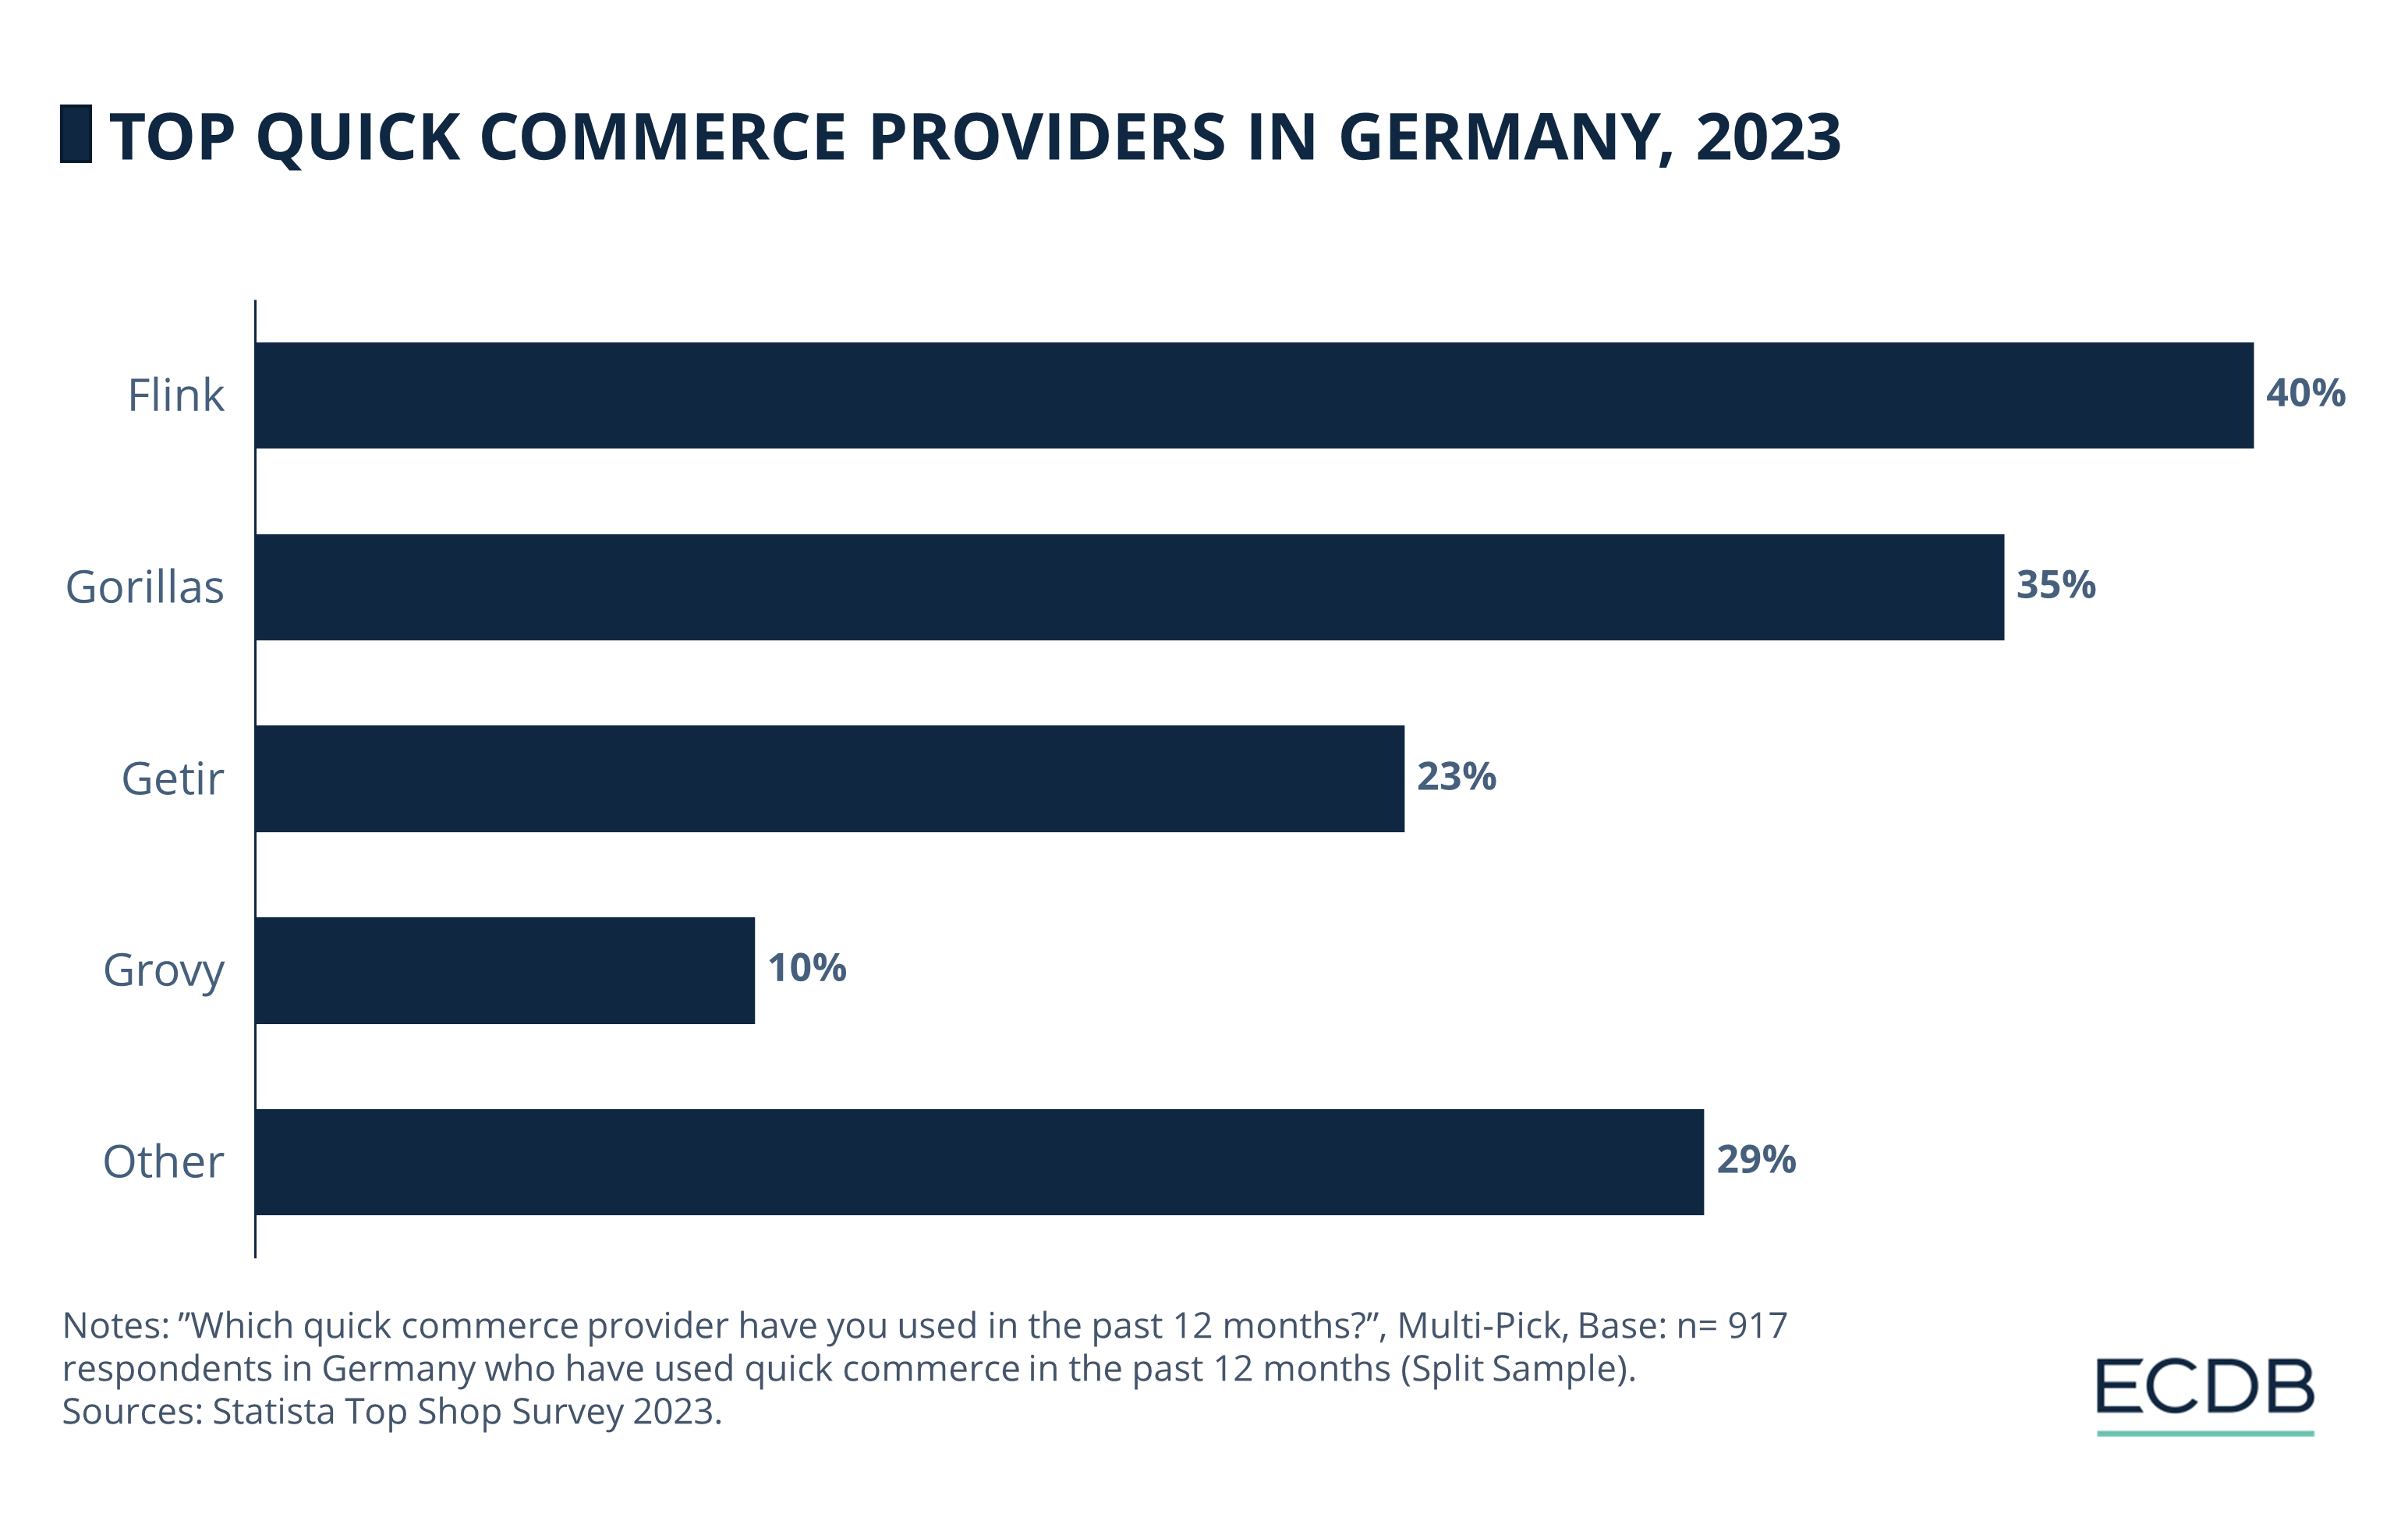 Top Quick Commerce Providers in Germany, 2023